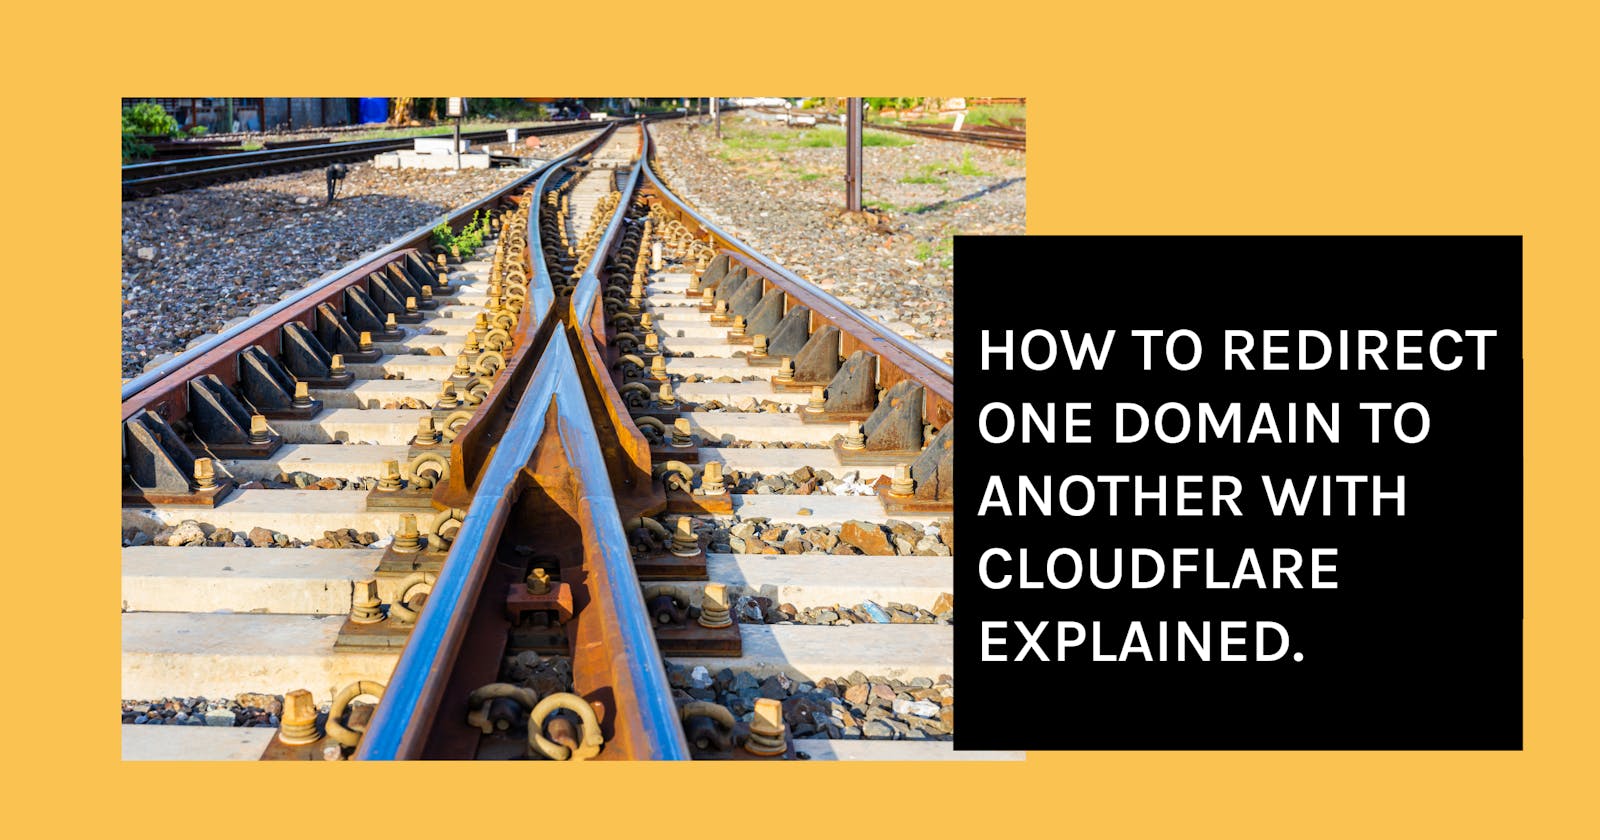 How to redirect one Domain to Another with Cloudflare explained.